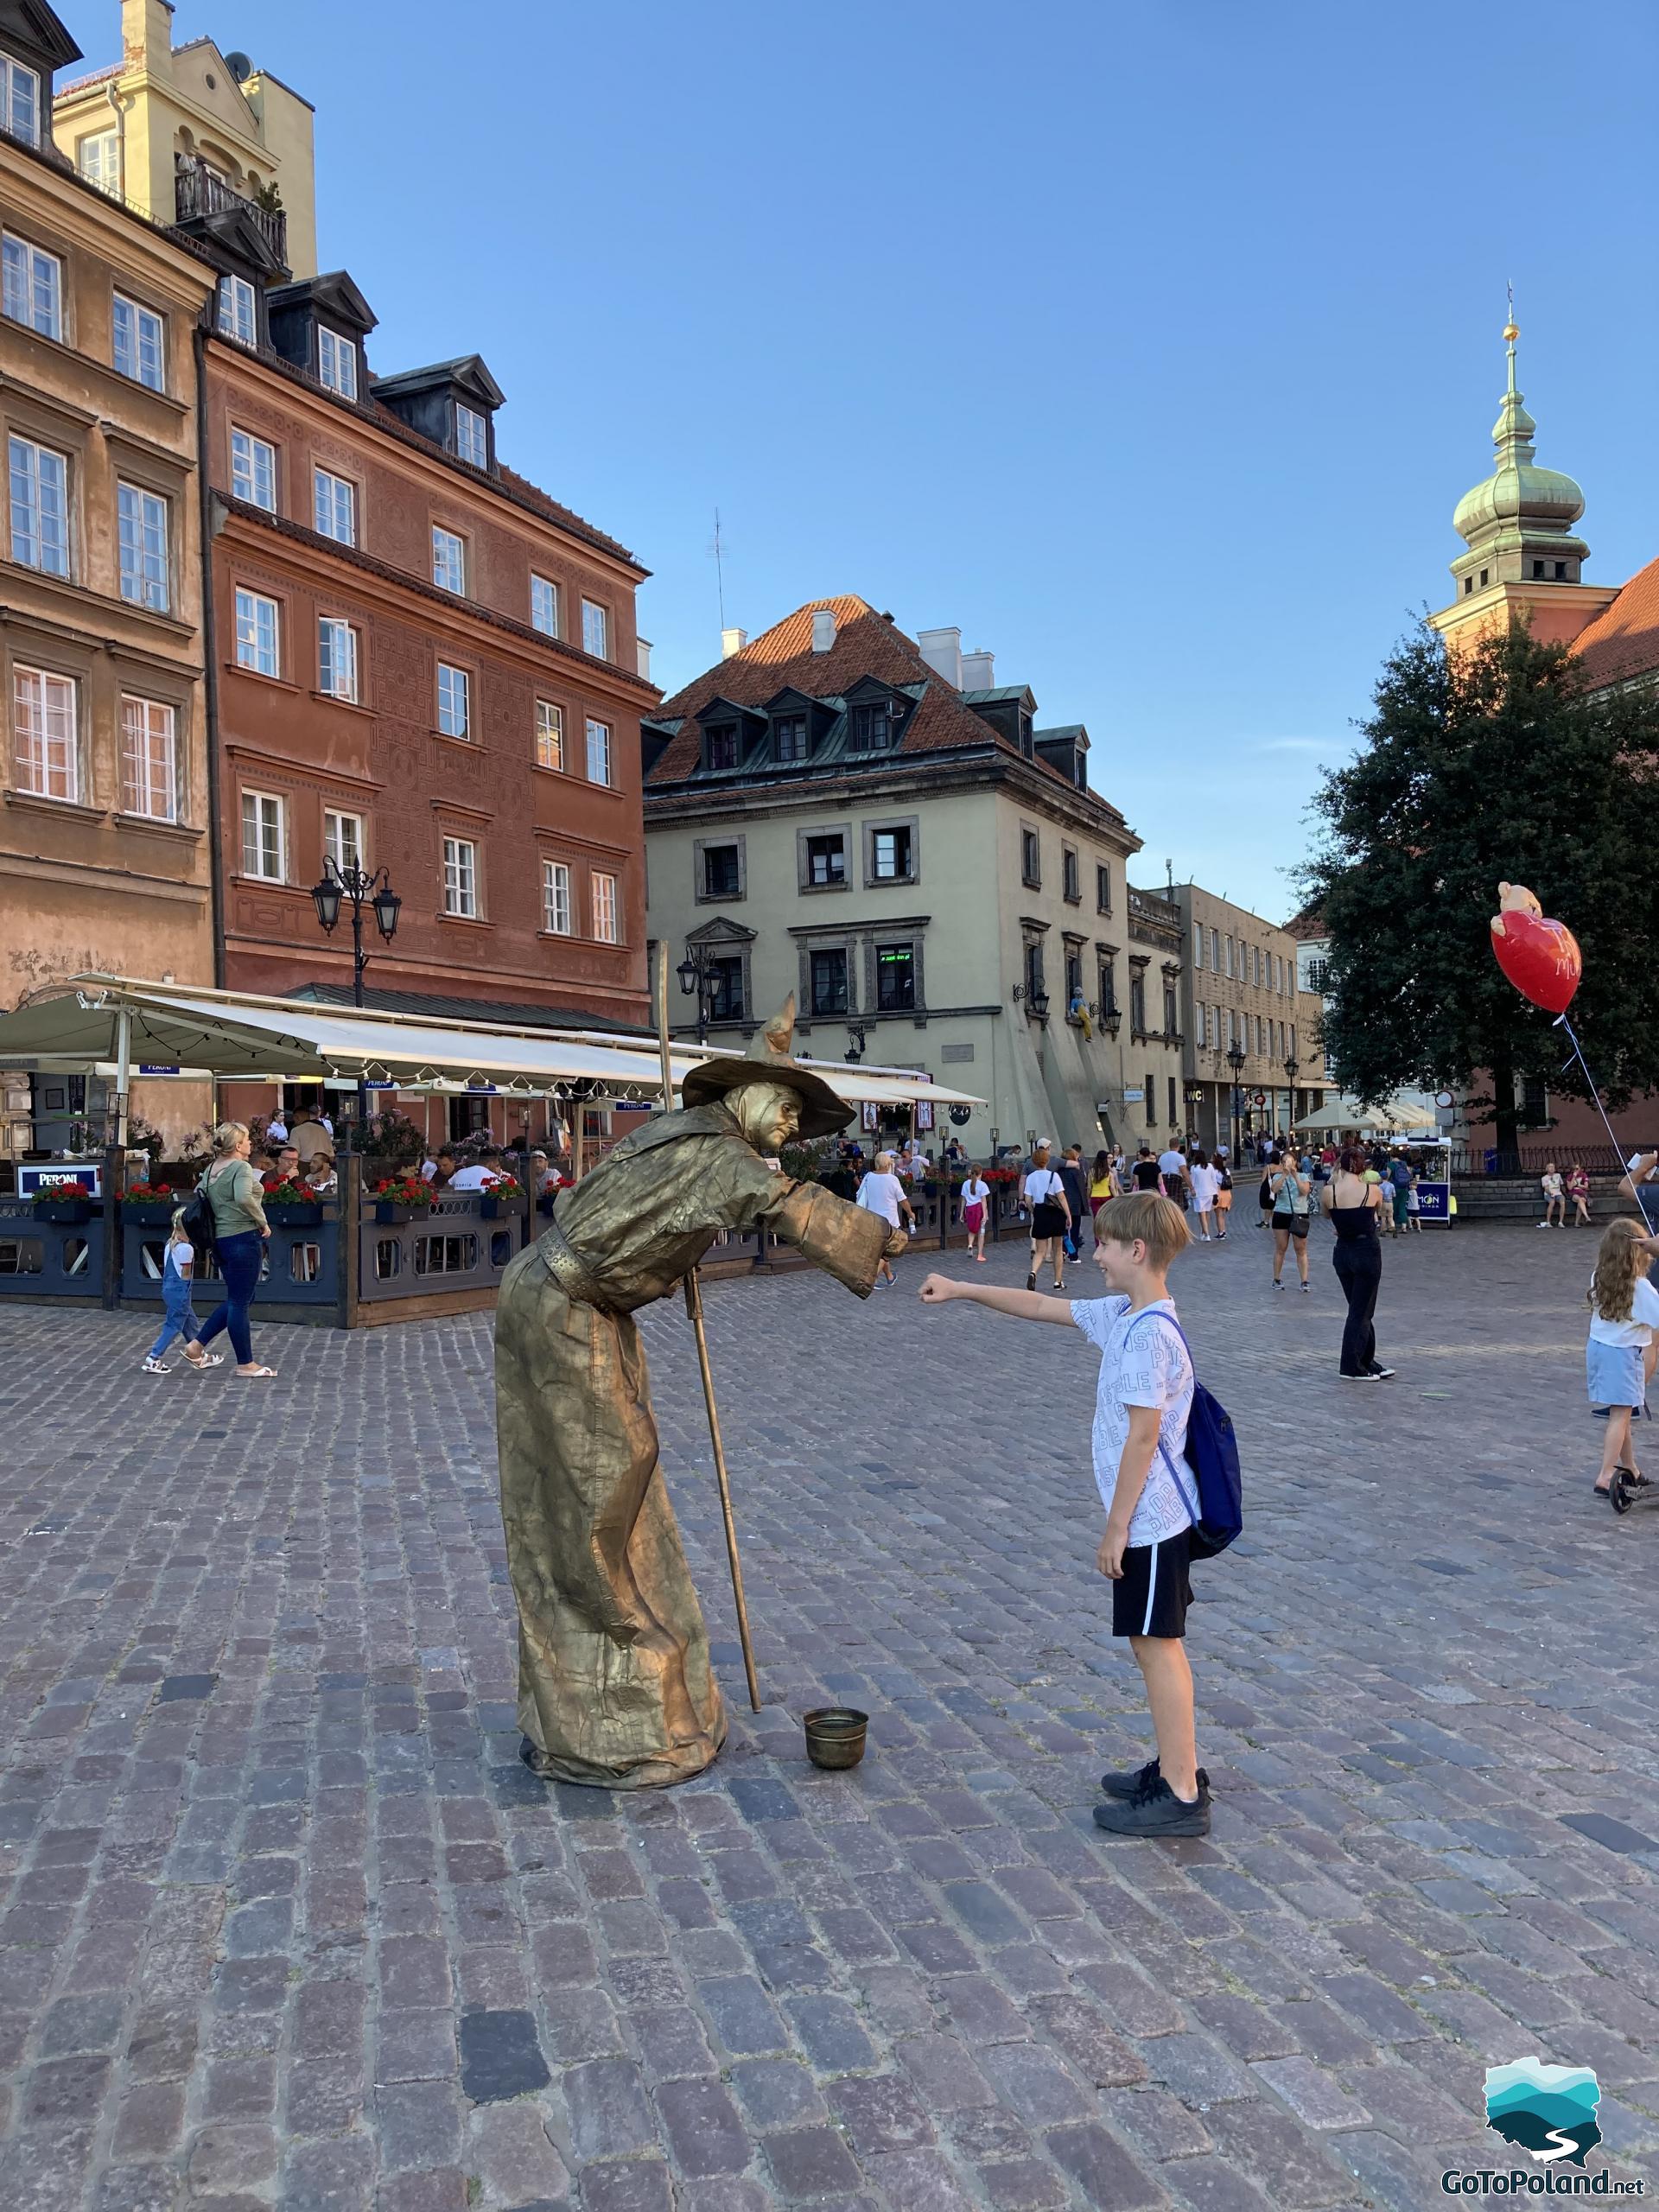 a gold-painted performer greets a boy, tenement houses in the background